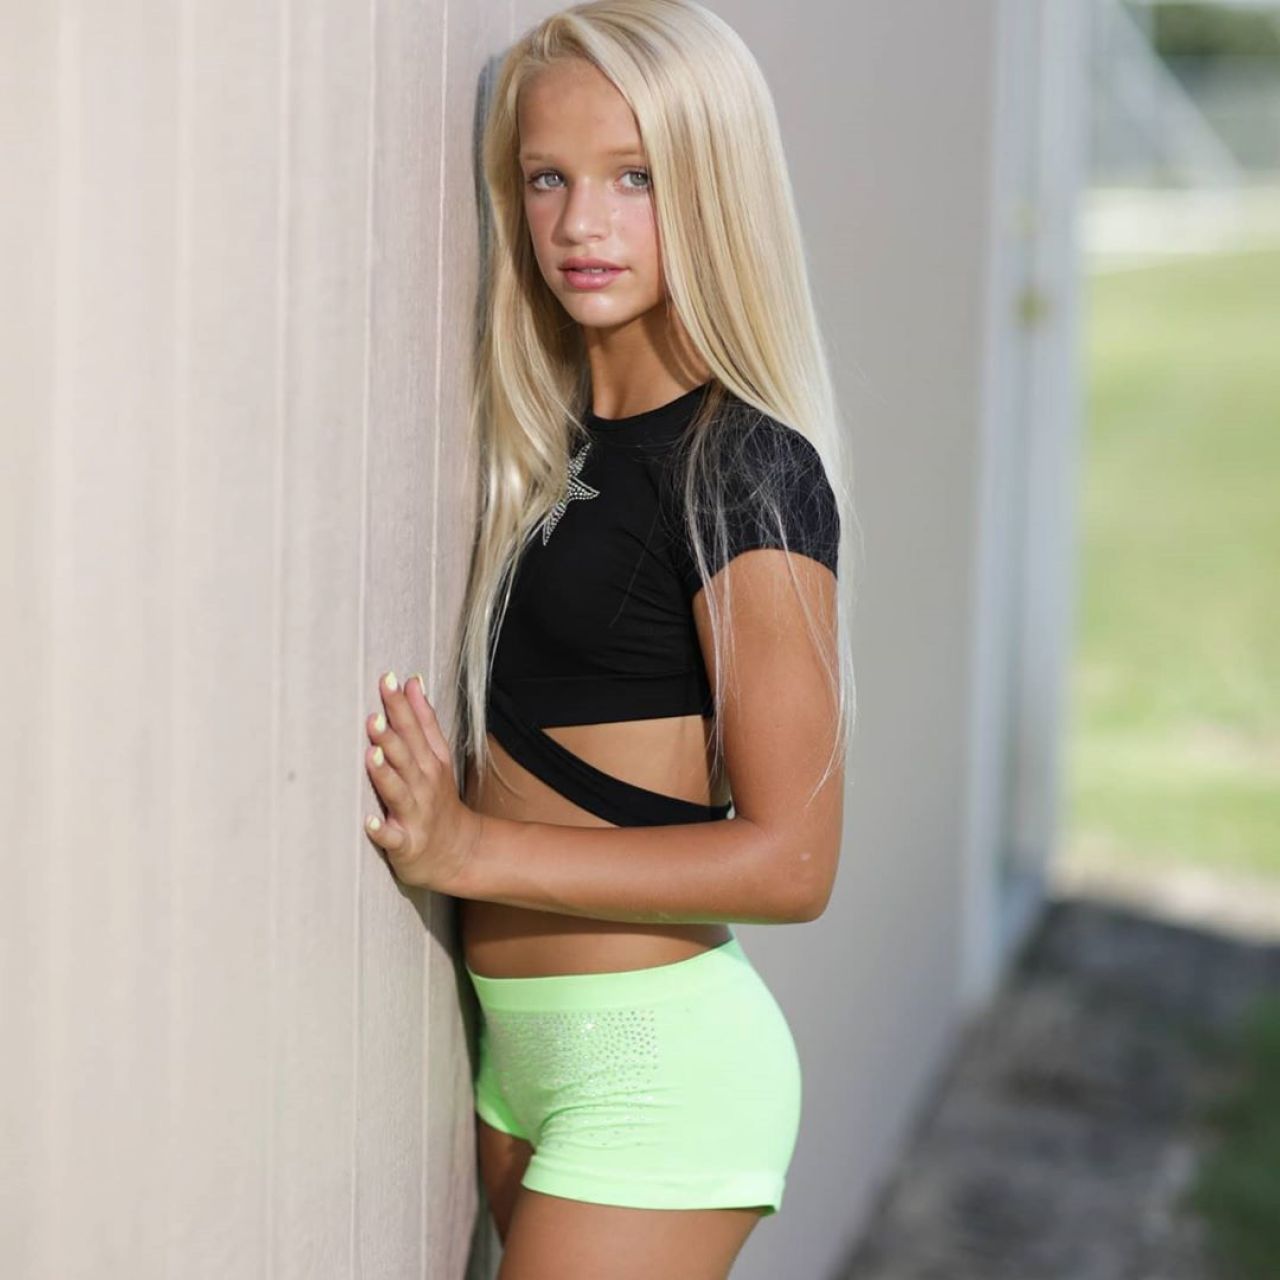 Natalie Grace: Age, Wiki, Photos, And Biography 10C